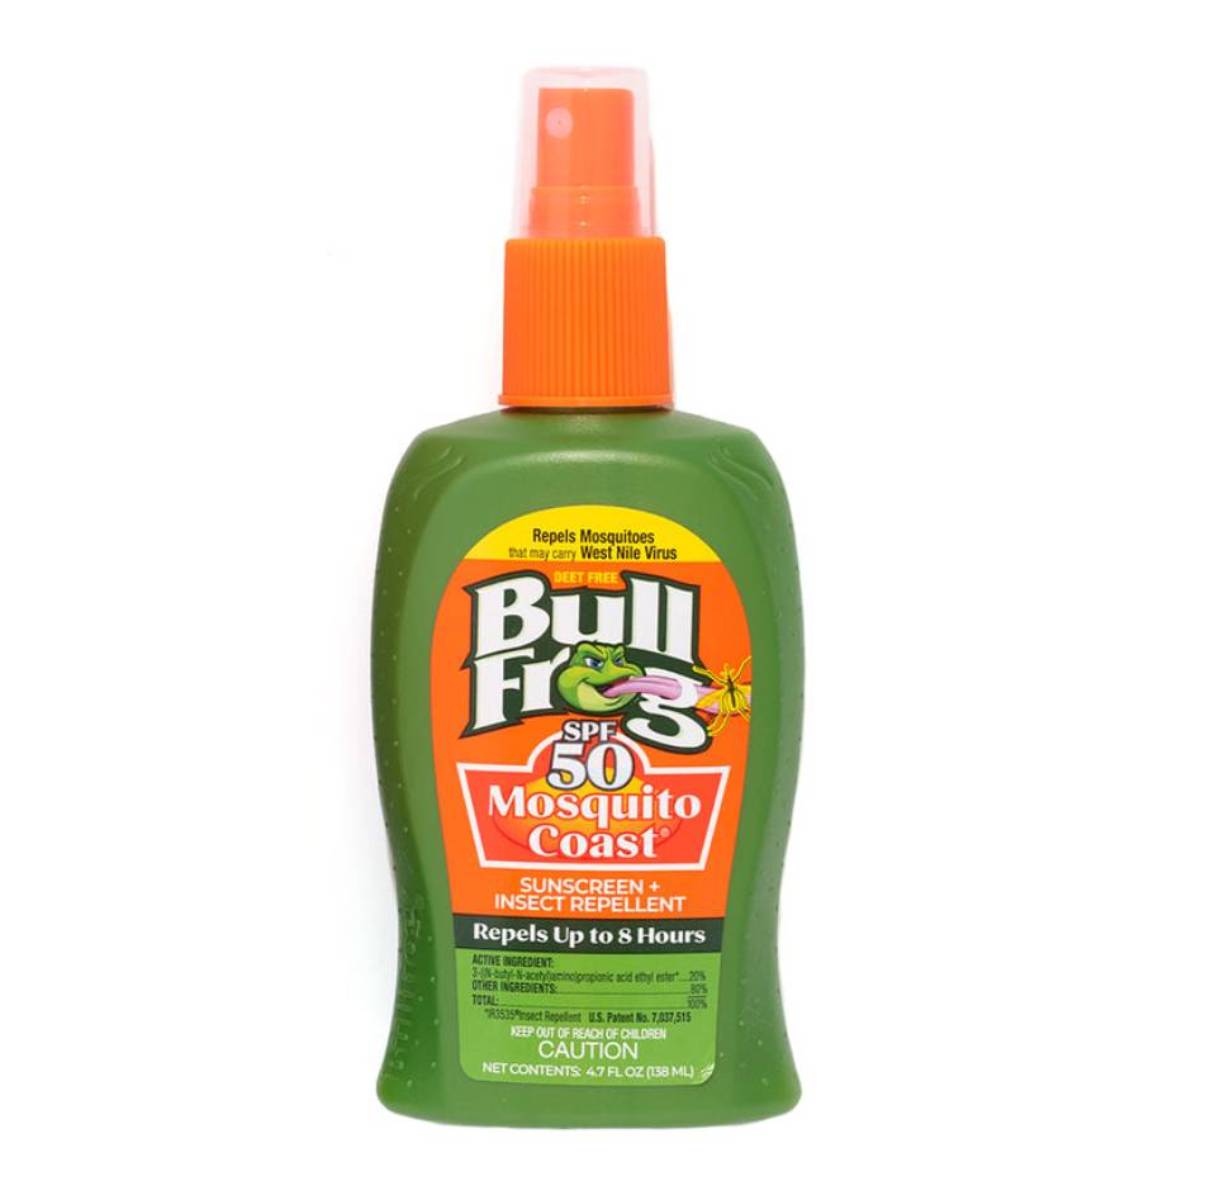 Bullfrog® Mosquito Coast Sunscreen and Insect Repellent Pump Spray